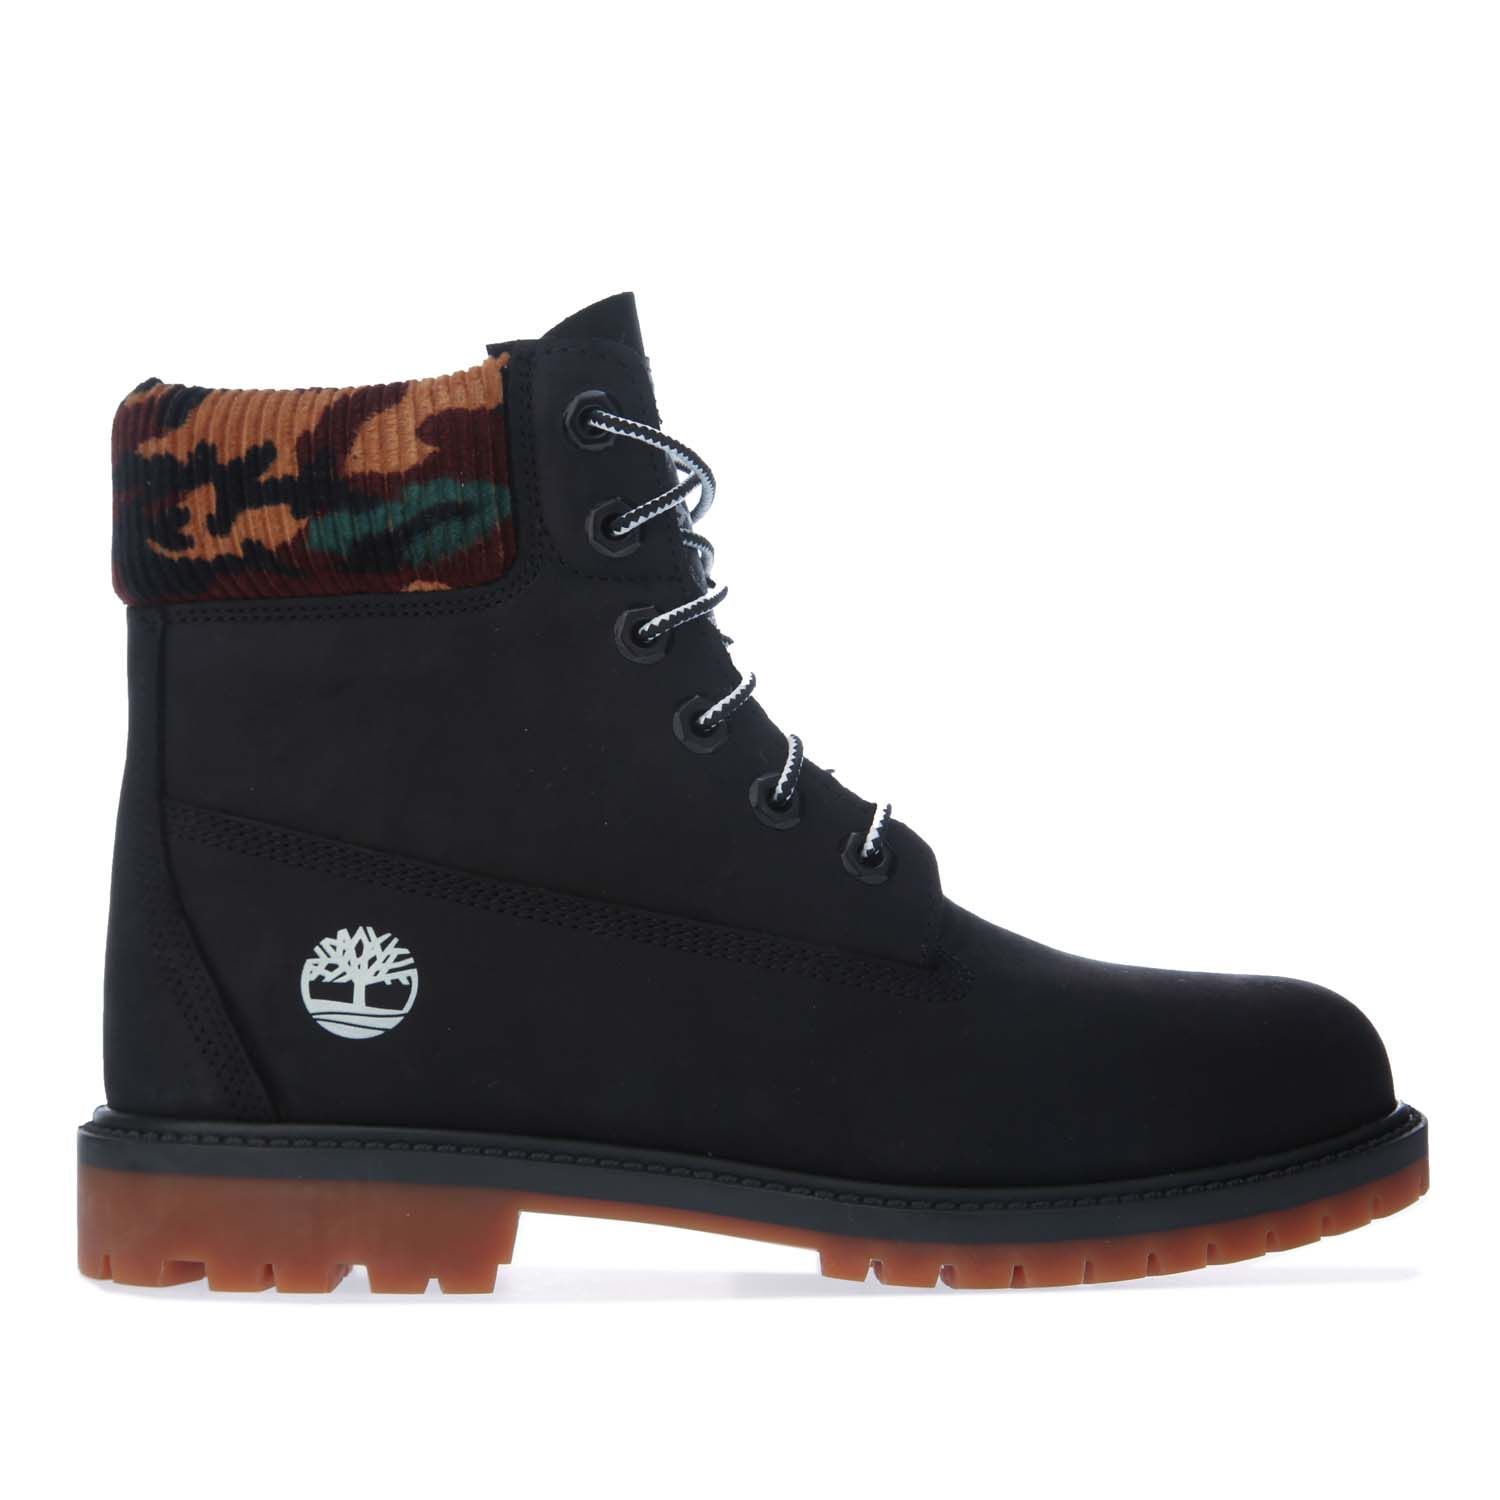 Womens Timberland 6 Inch Heritage Cupsole Boots in black.- Nubuck leather upper.- Lace up style.- Seam-sealed waterproof construction.- Contrast padded cuff.- Round toe.- Anti-fatigue footbed.- EVA midsole for lightweight cushioning.- Lugged tread.- Durable rubber outsole.- Leather upper  Leather lining  Synthetic sole.- Ref: CA2M7T